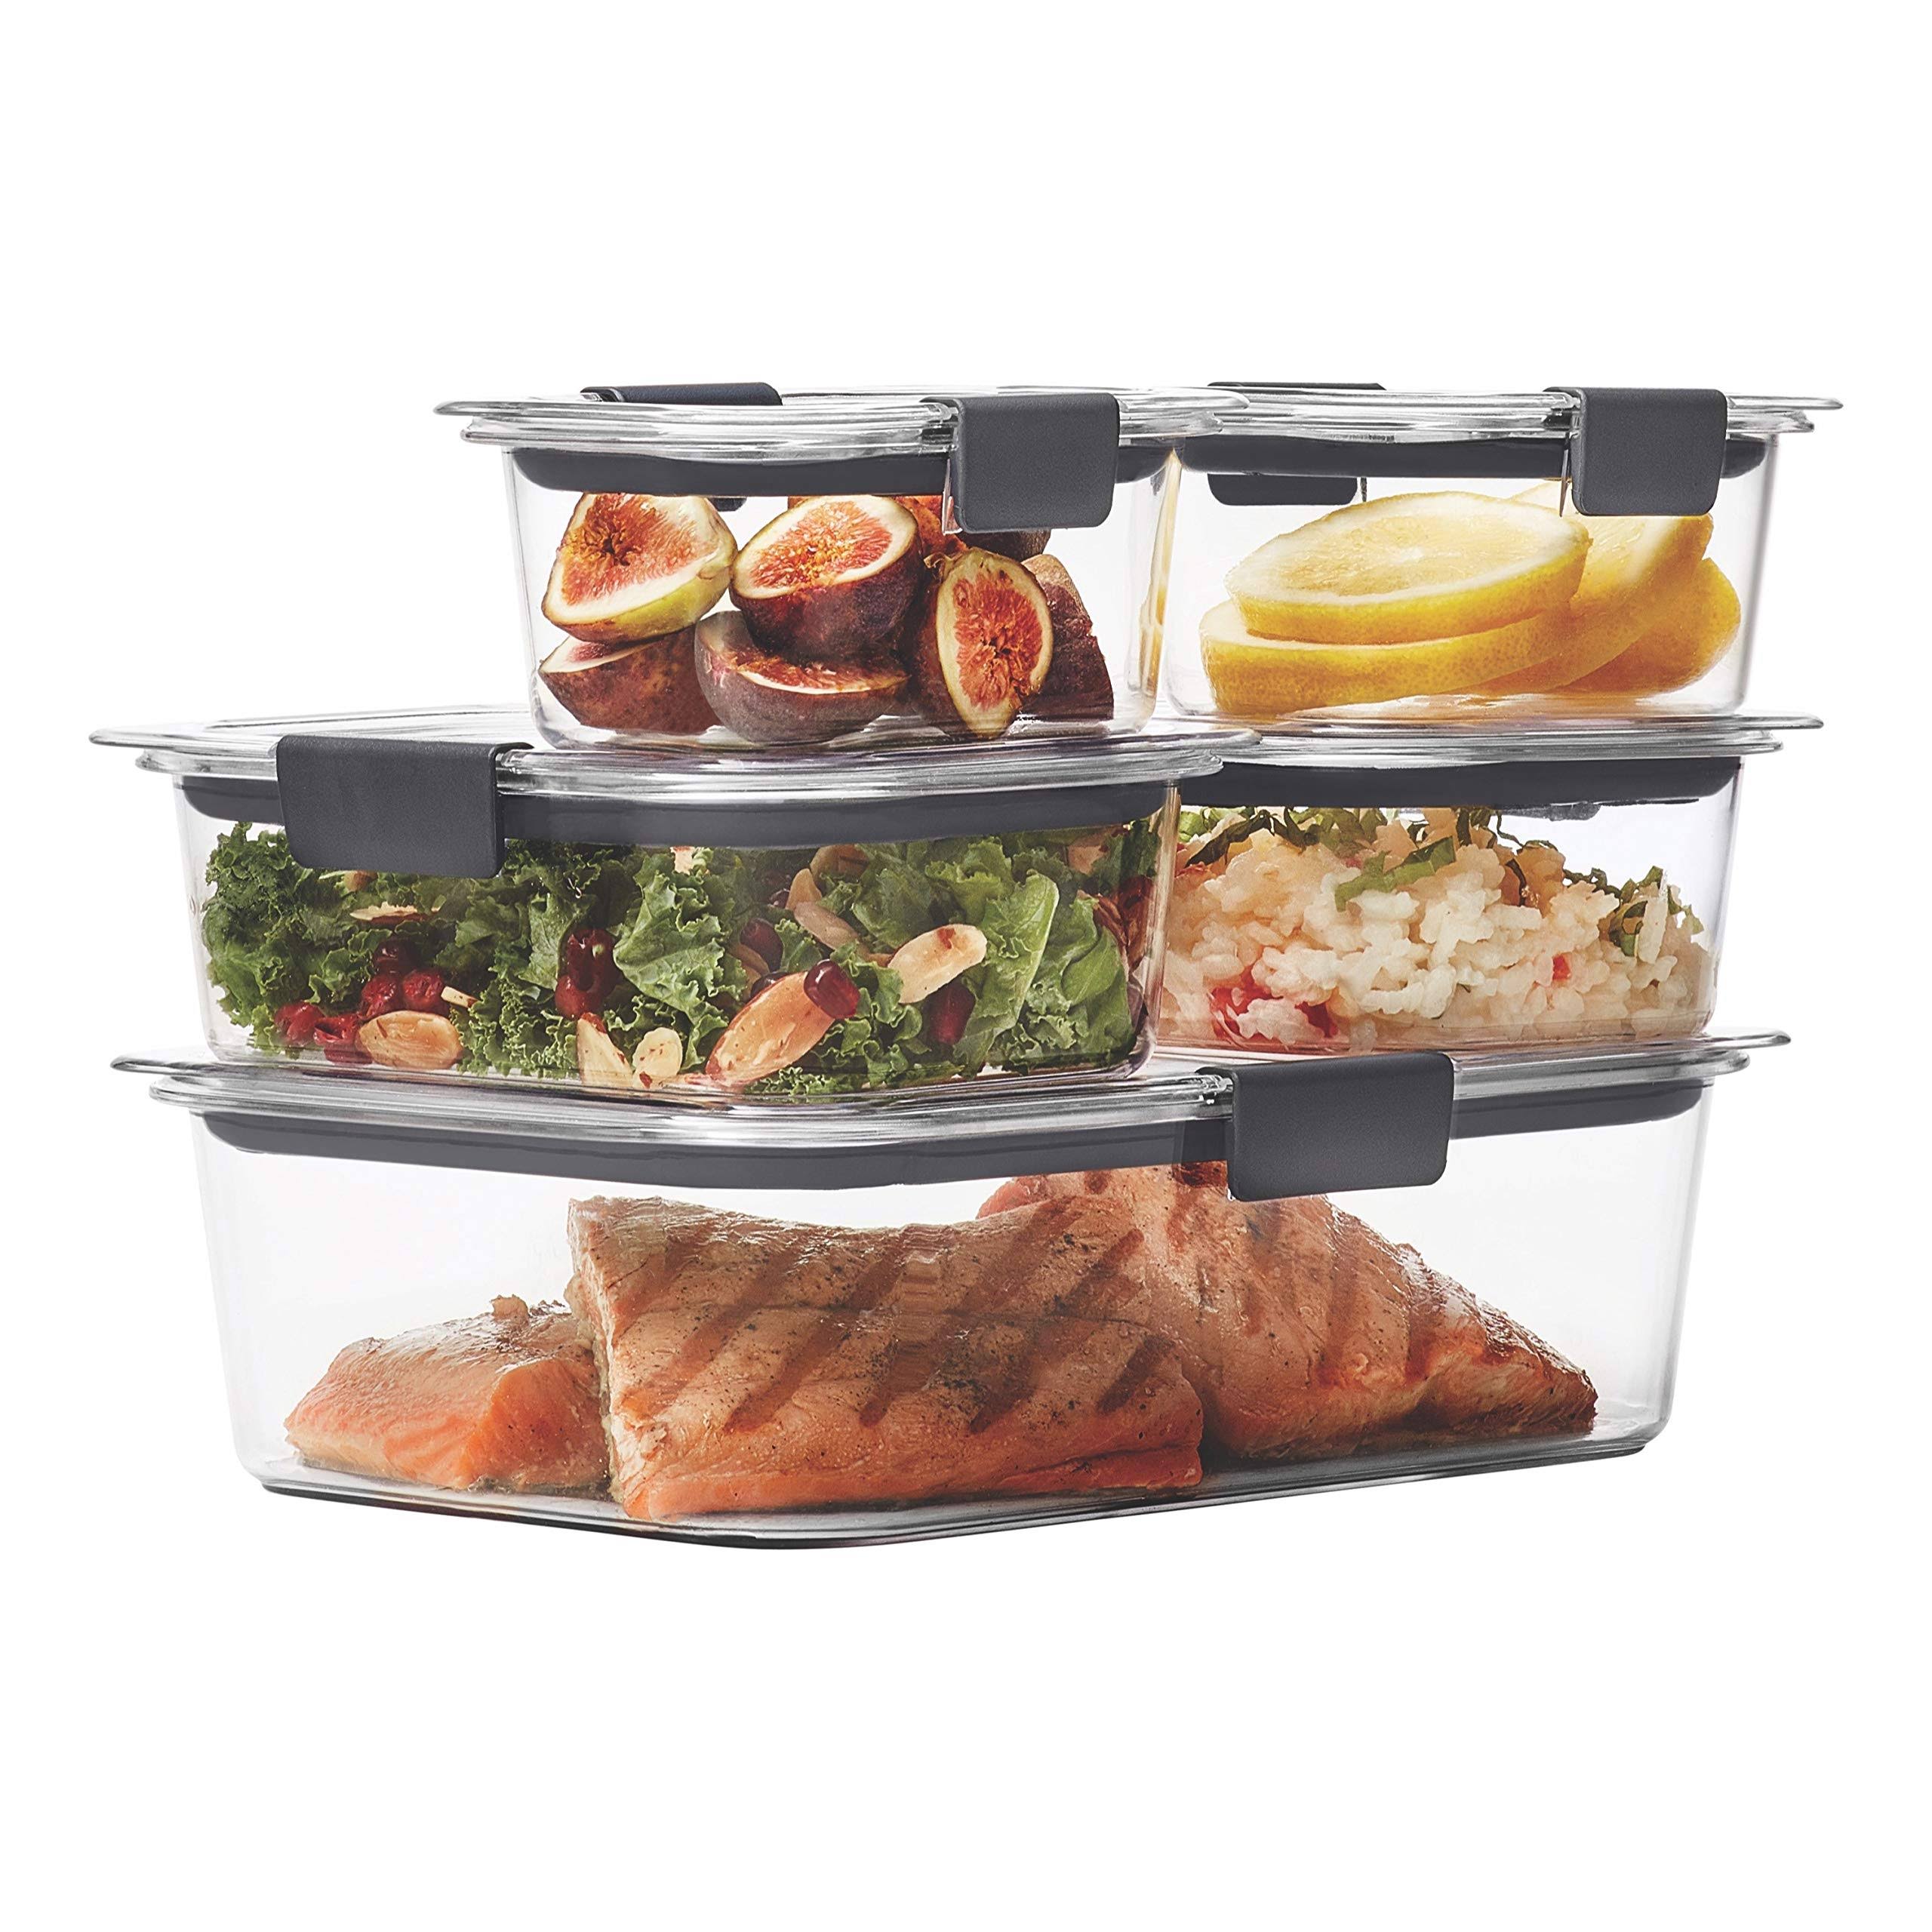 Rubbermaid Brilliance Food Storage Container Set - Clear, 10pcs